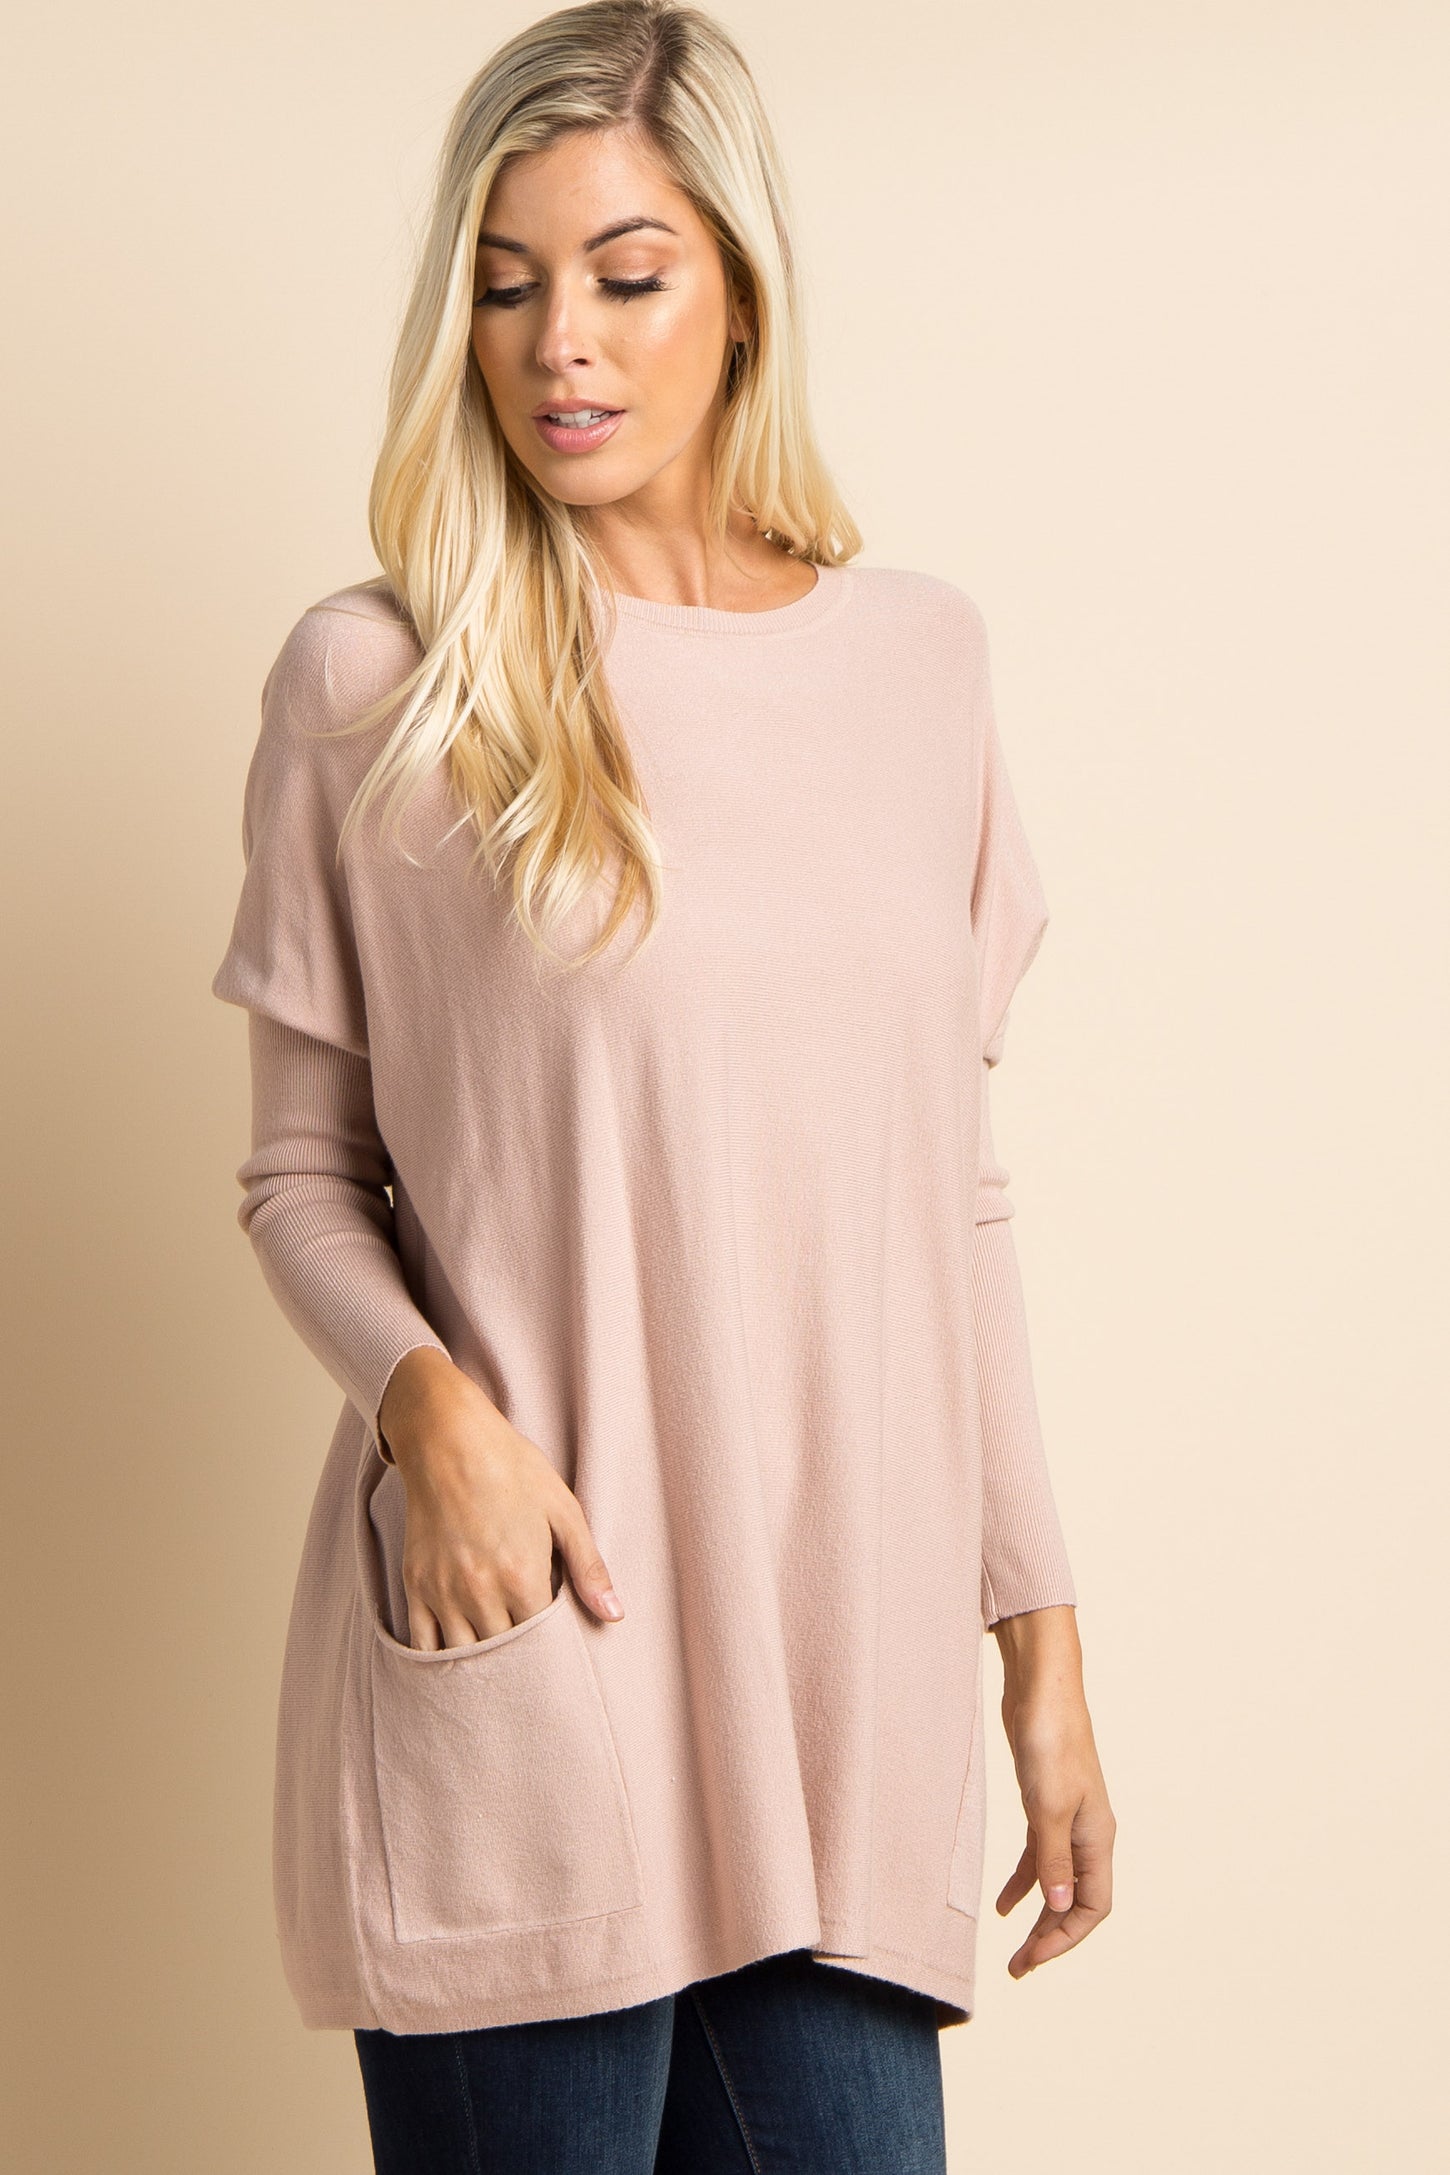 Light Pink Pocketed Dolman Sleeve Top